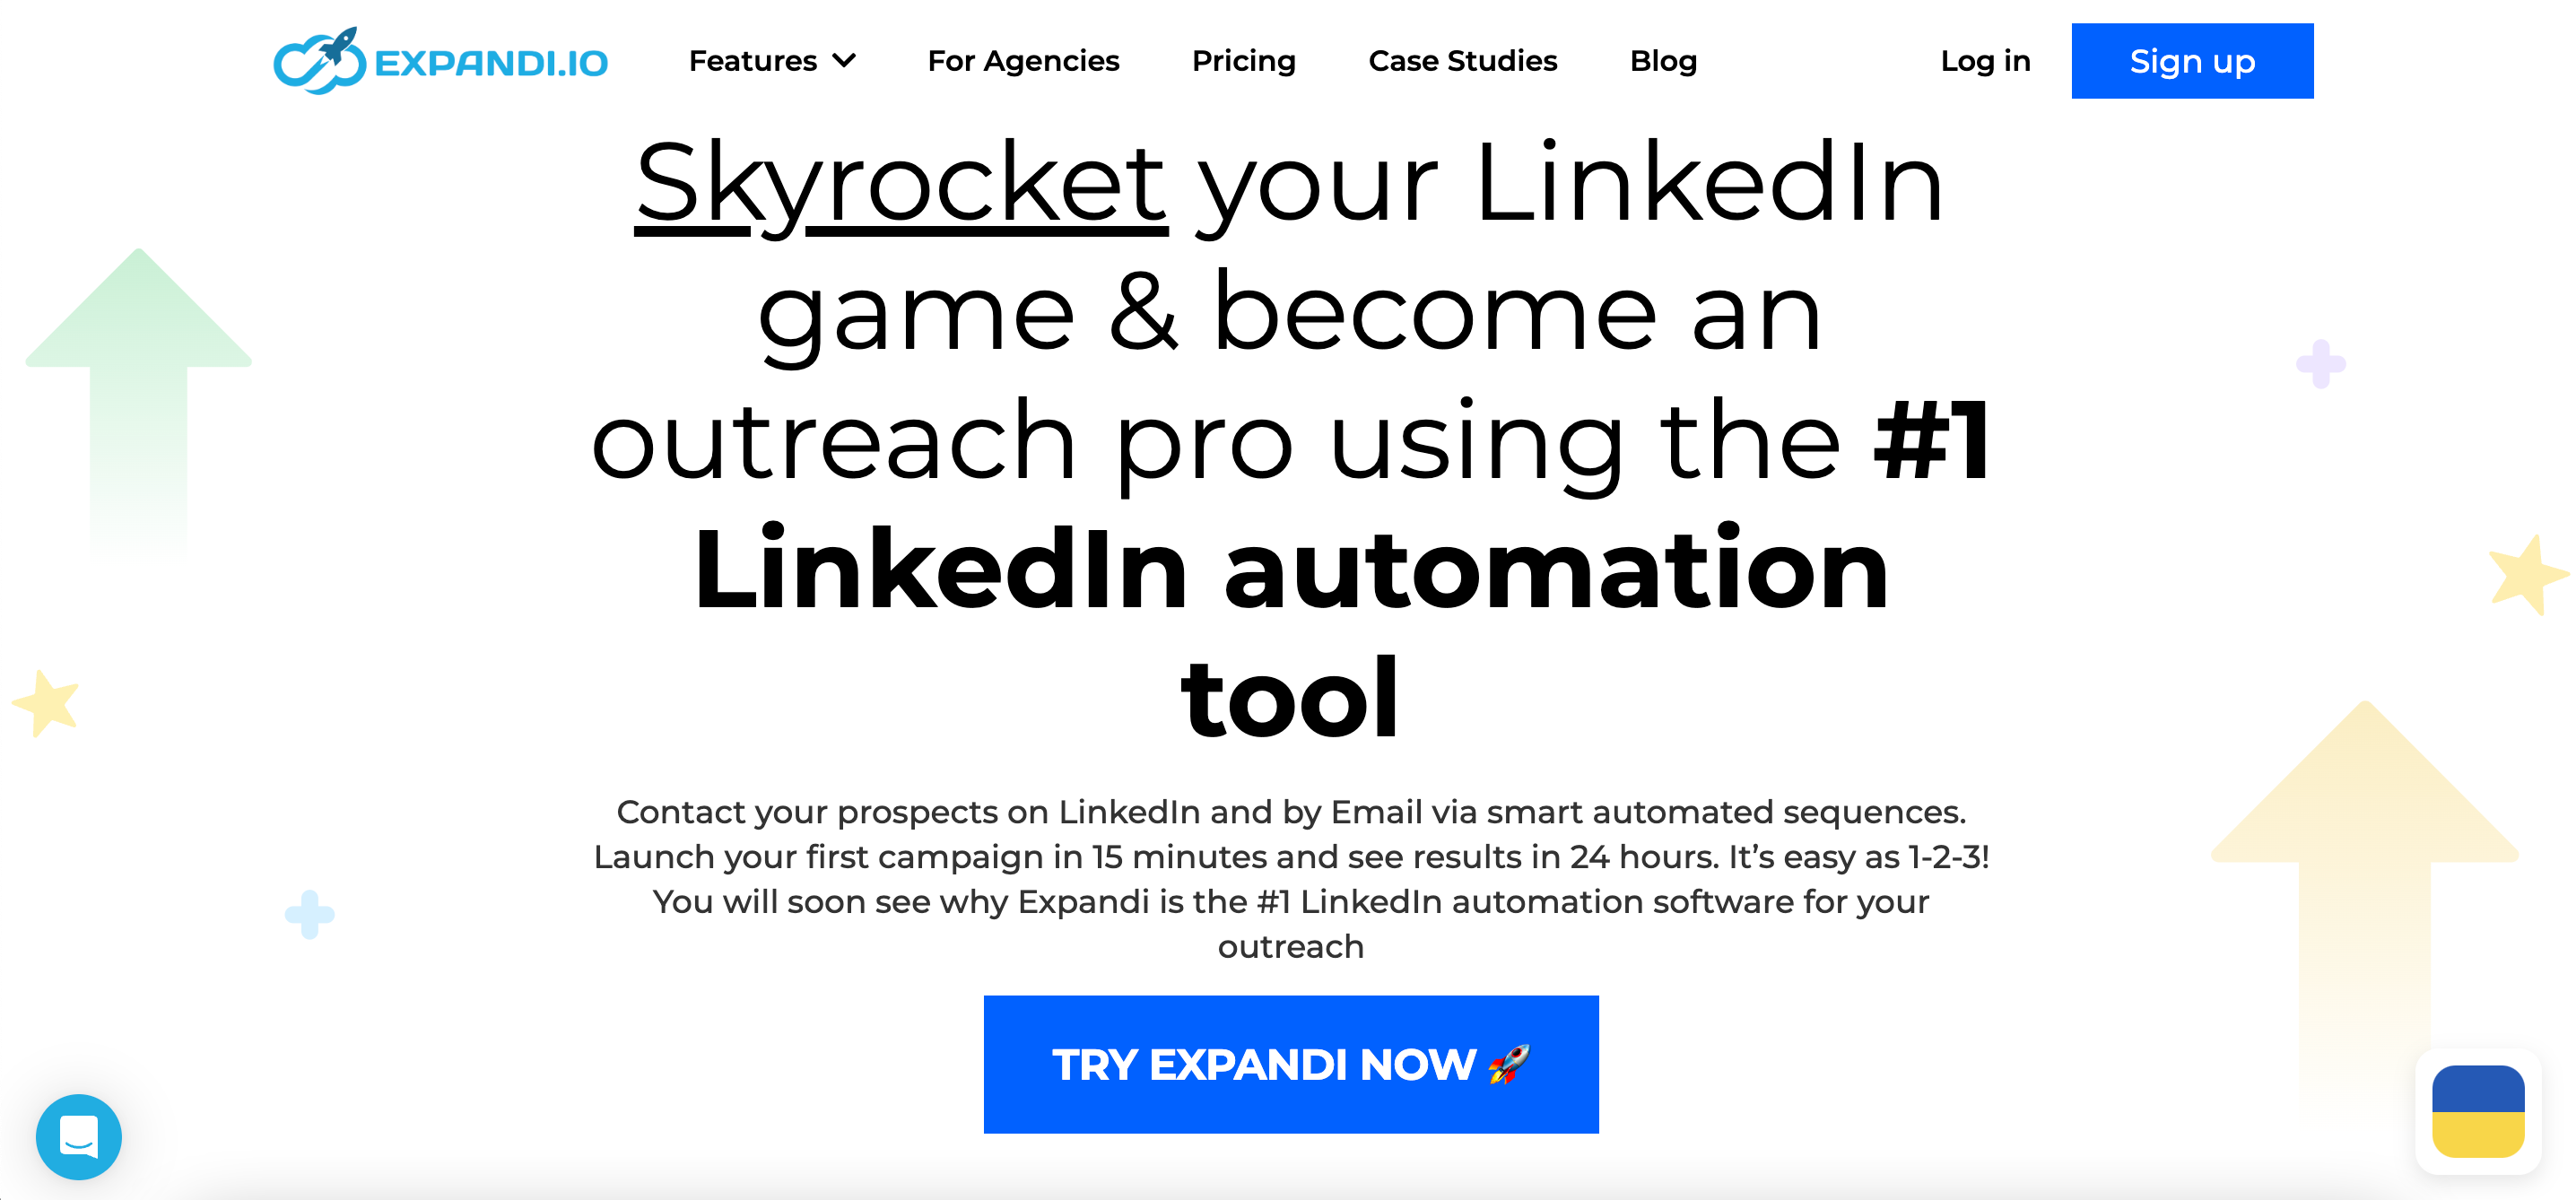 Expandi claims itself to be the #1 LinkedIn automation tool.